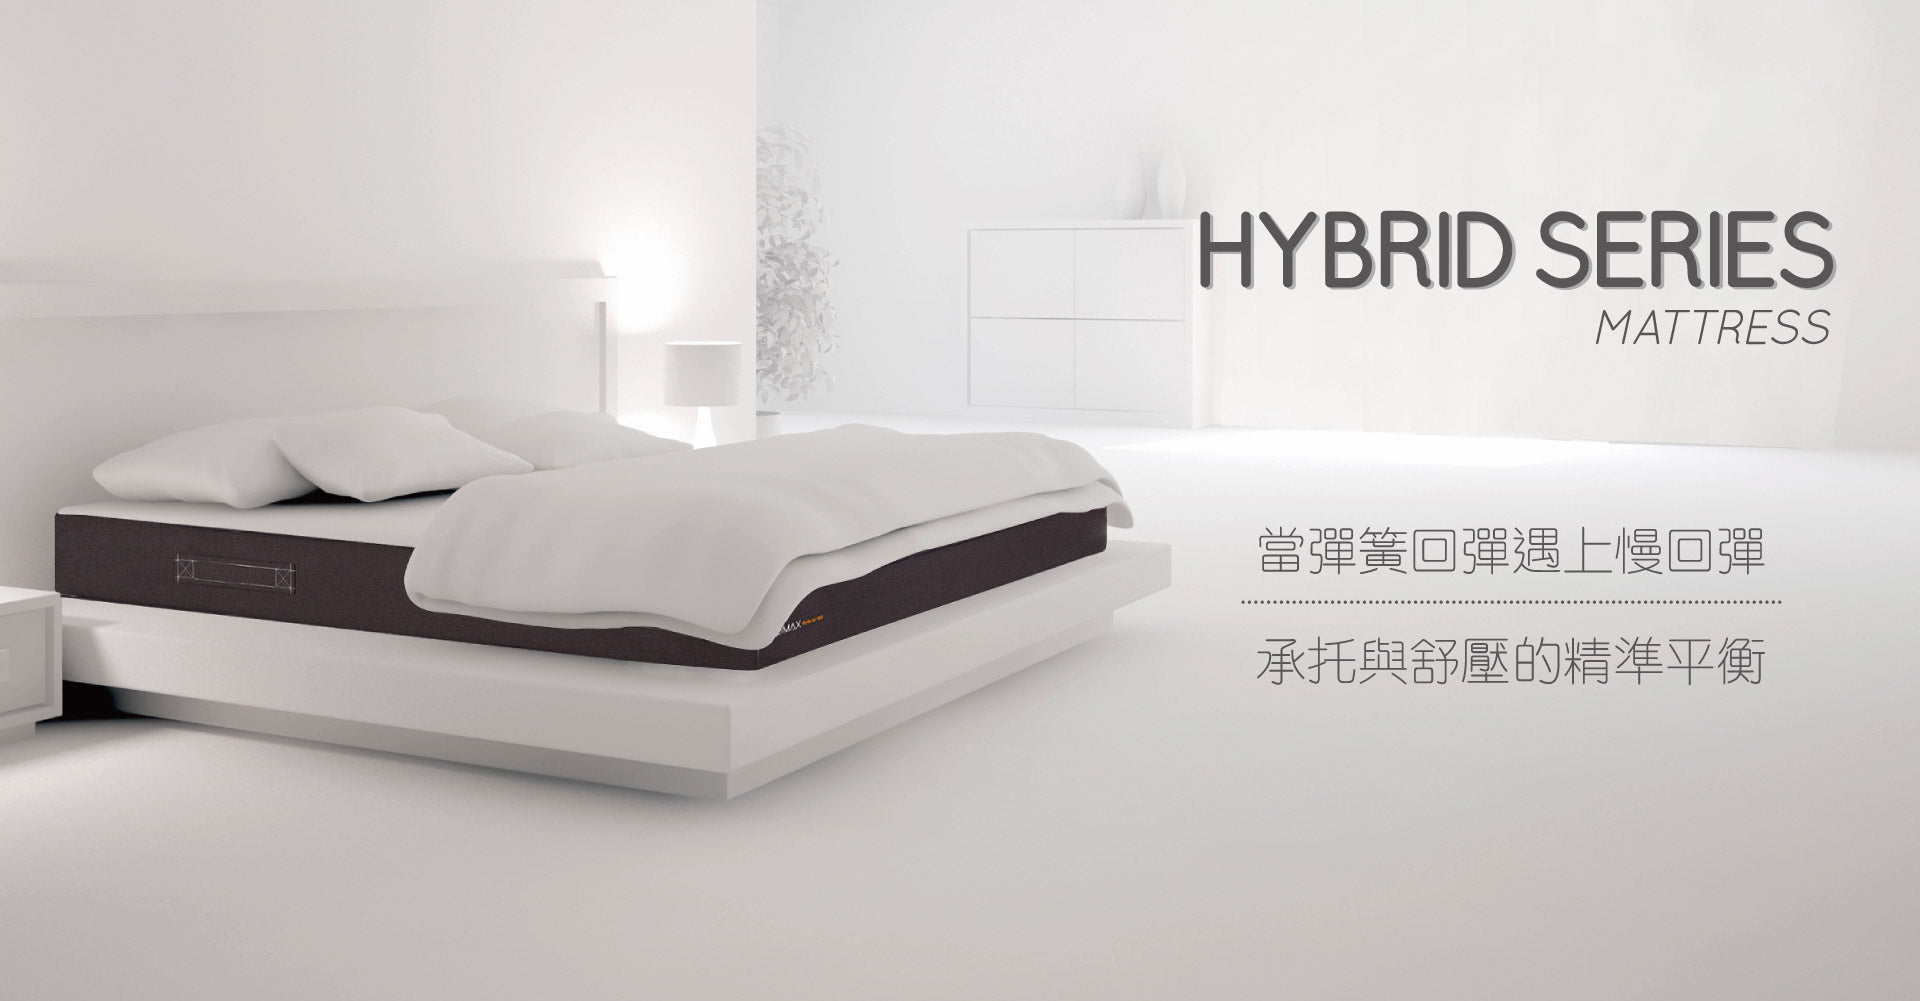 Hybrid 200 Pro Mattress - Tailor-made Size (above 48"W)